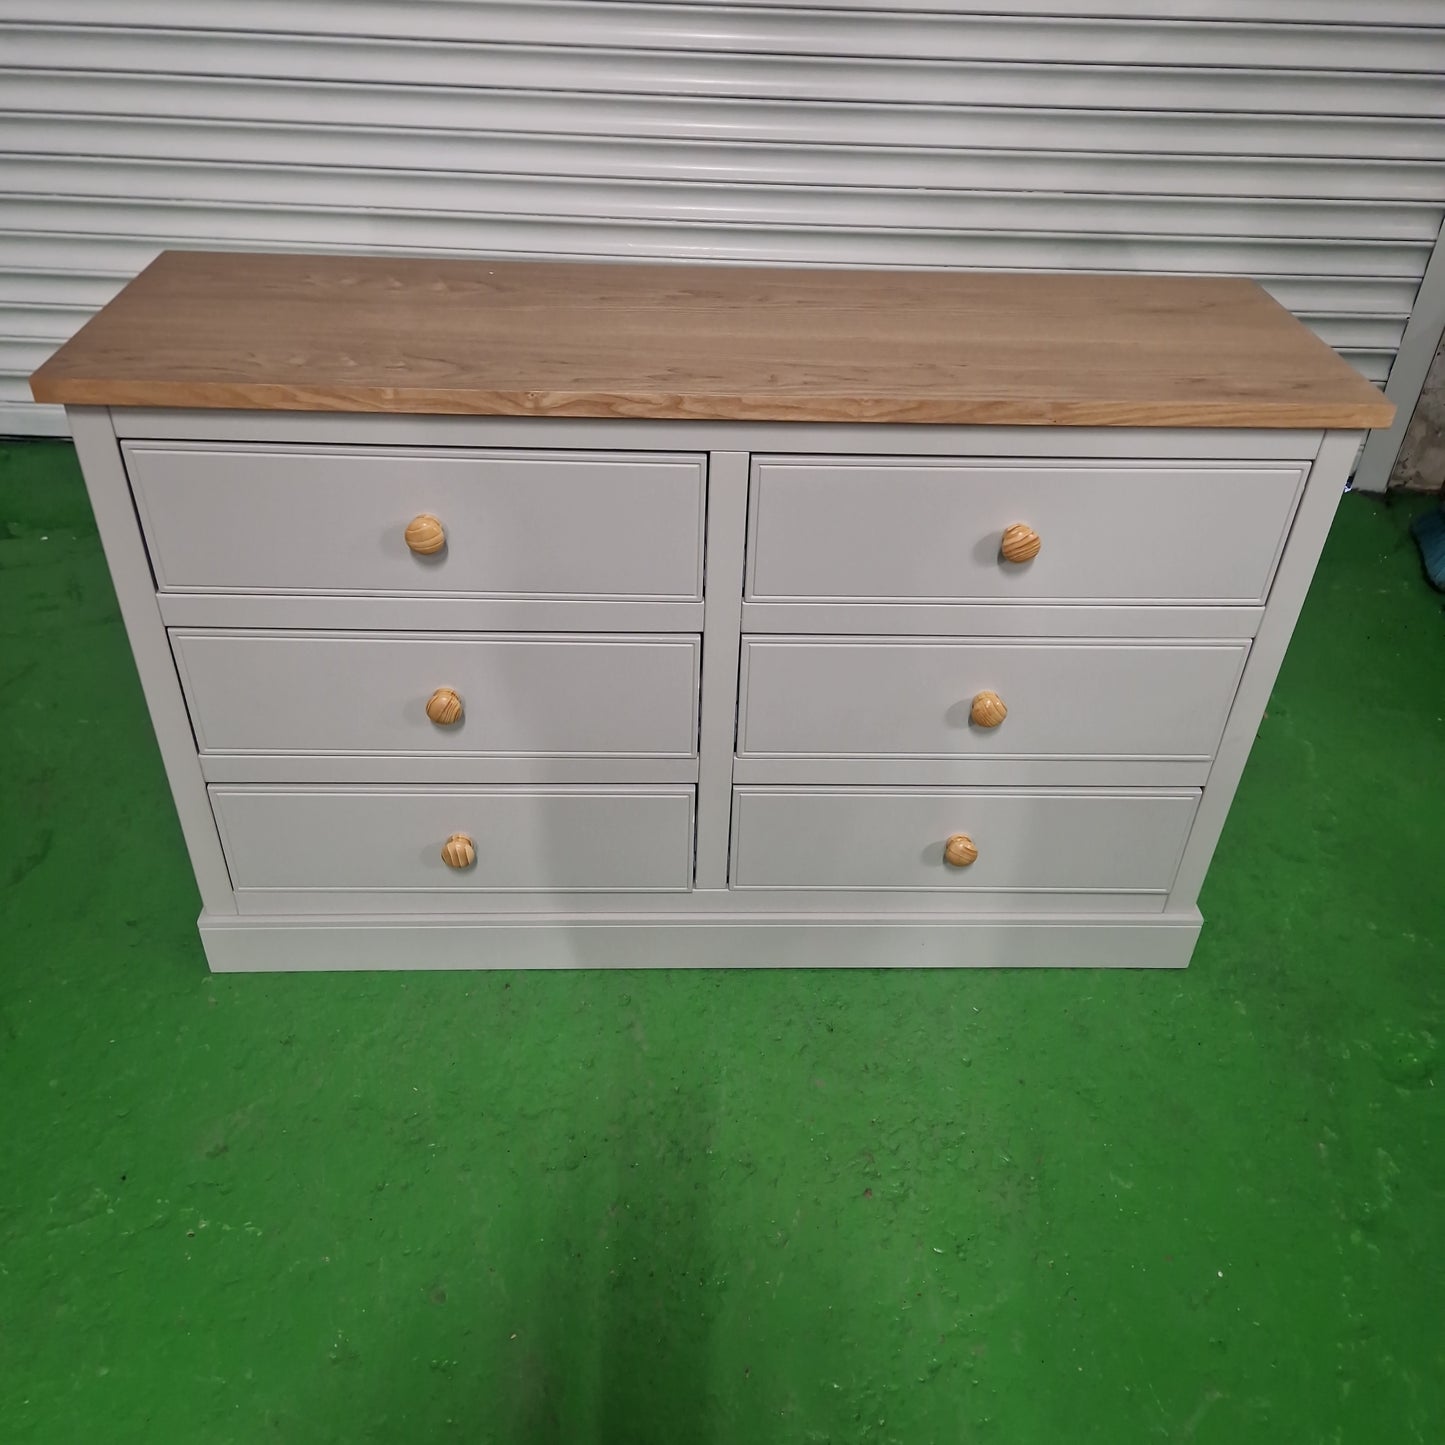 NEW Victoria 3+3 Chest of Drawers Grey- Extra €50 for assembled (€325)